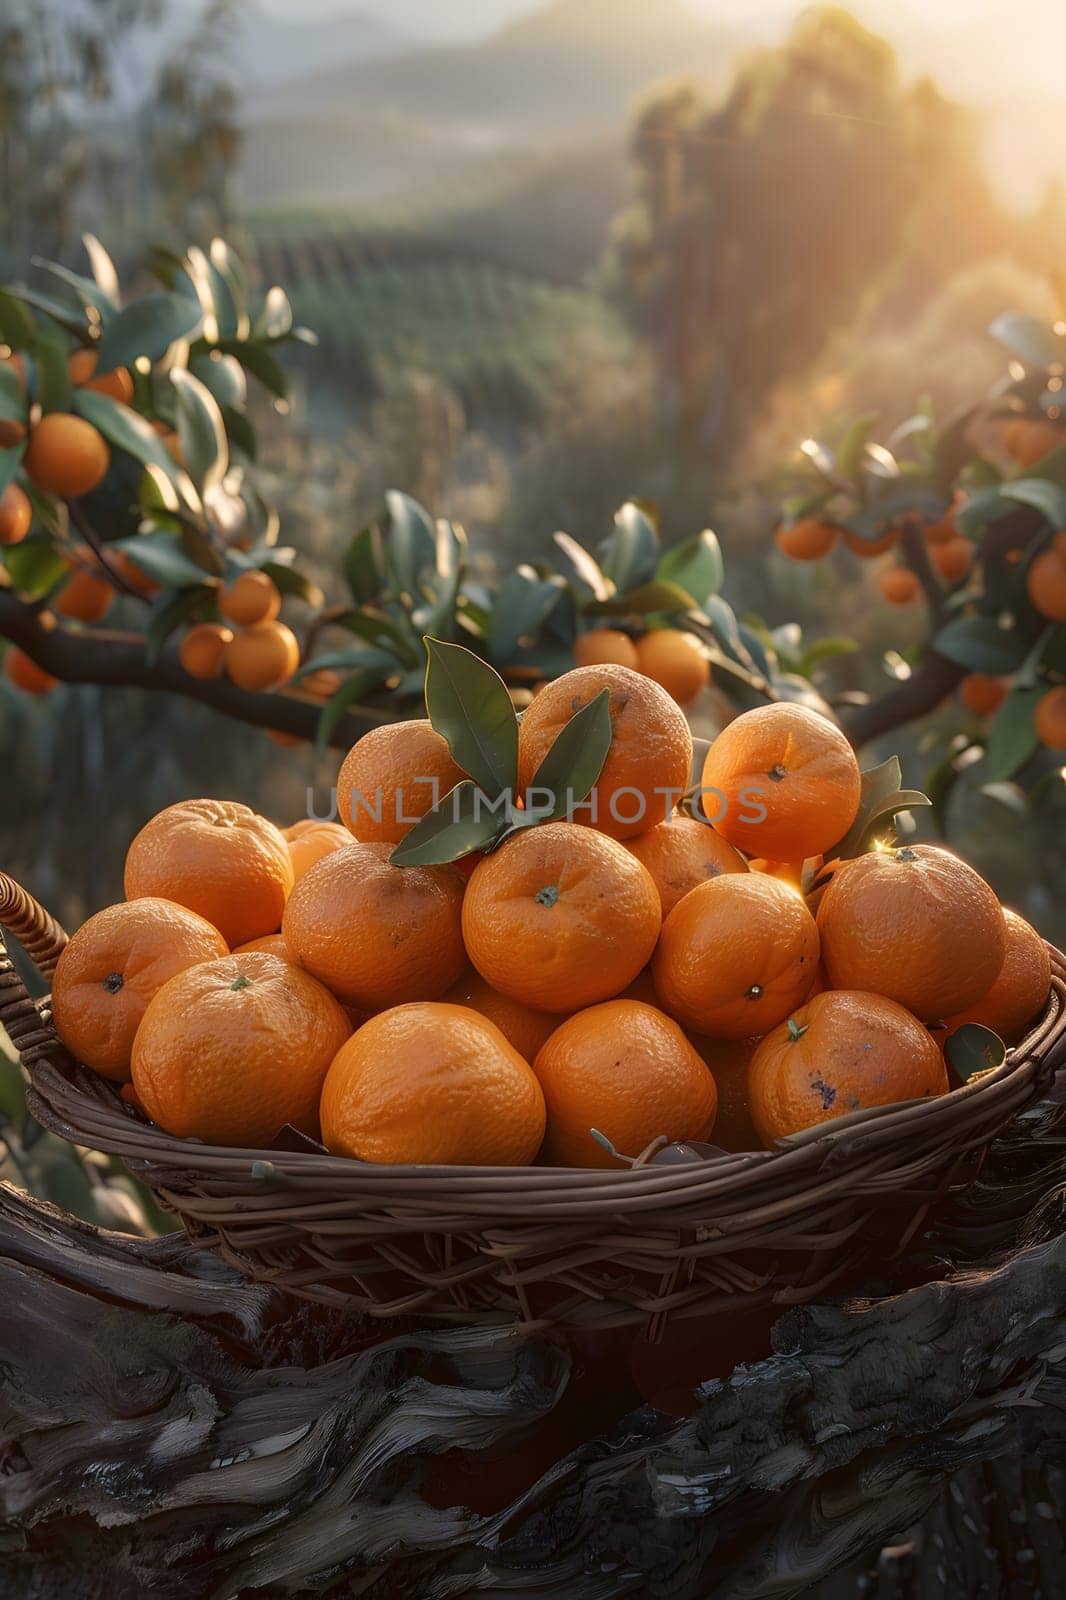 A basket of citrus fruits including Rangpur, Clementine, Bitter orange, Mandarin orange, Valencia orange is placed in front of a citrus tree, showcasing a variety of natural and delicious foods